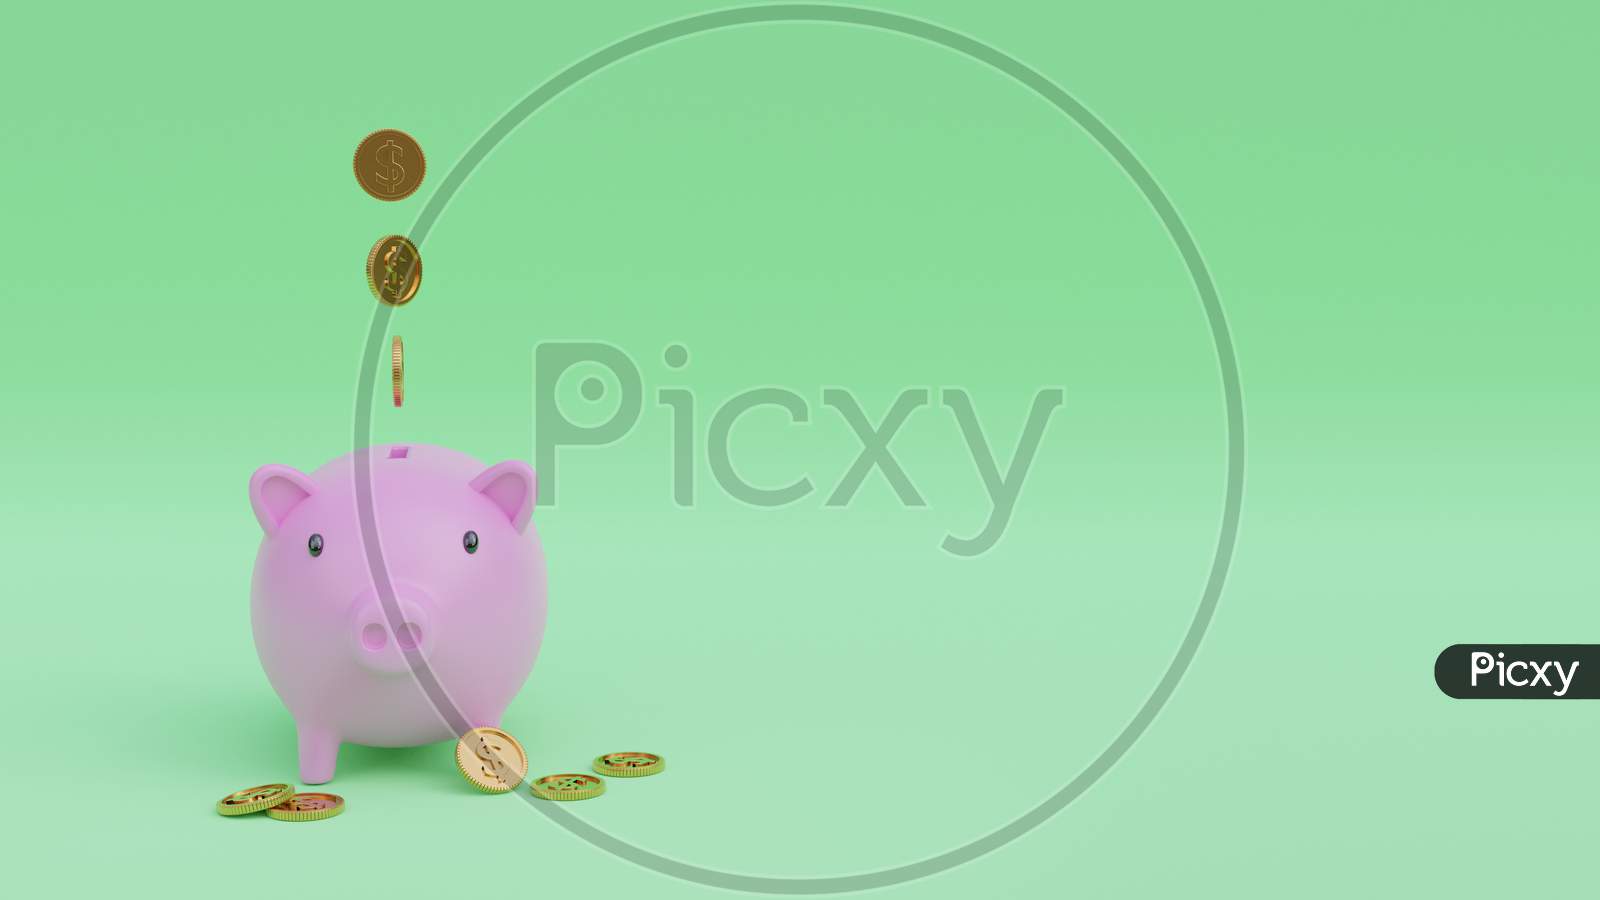 3D Render Illustration Of Piggy Bank And Floating Coins On The Green Screen, Concept Of Saving